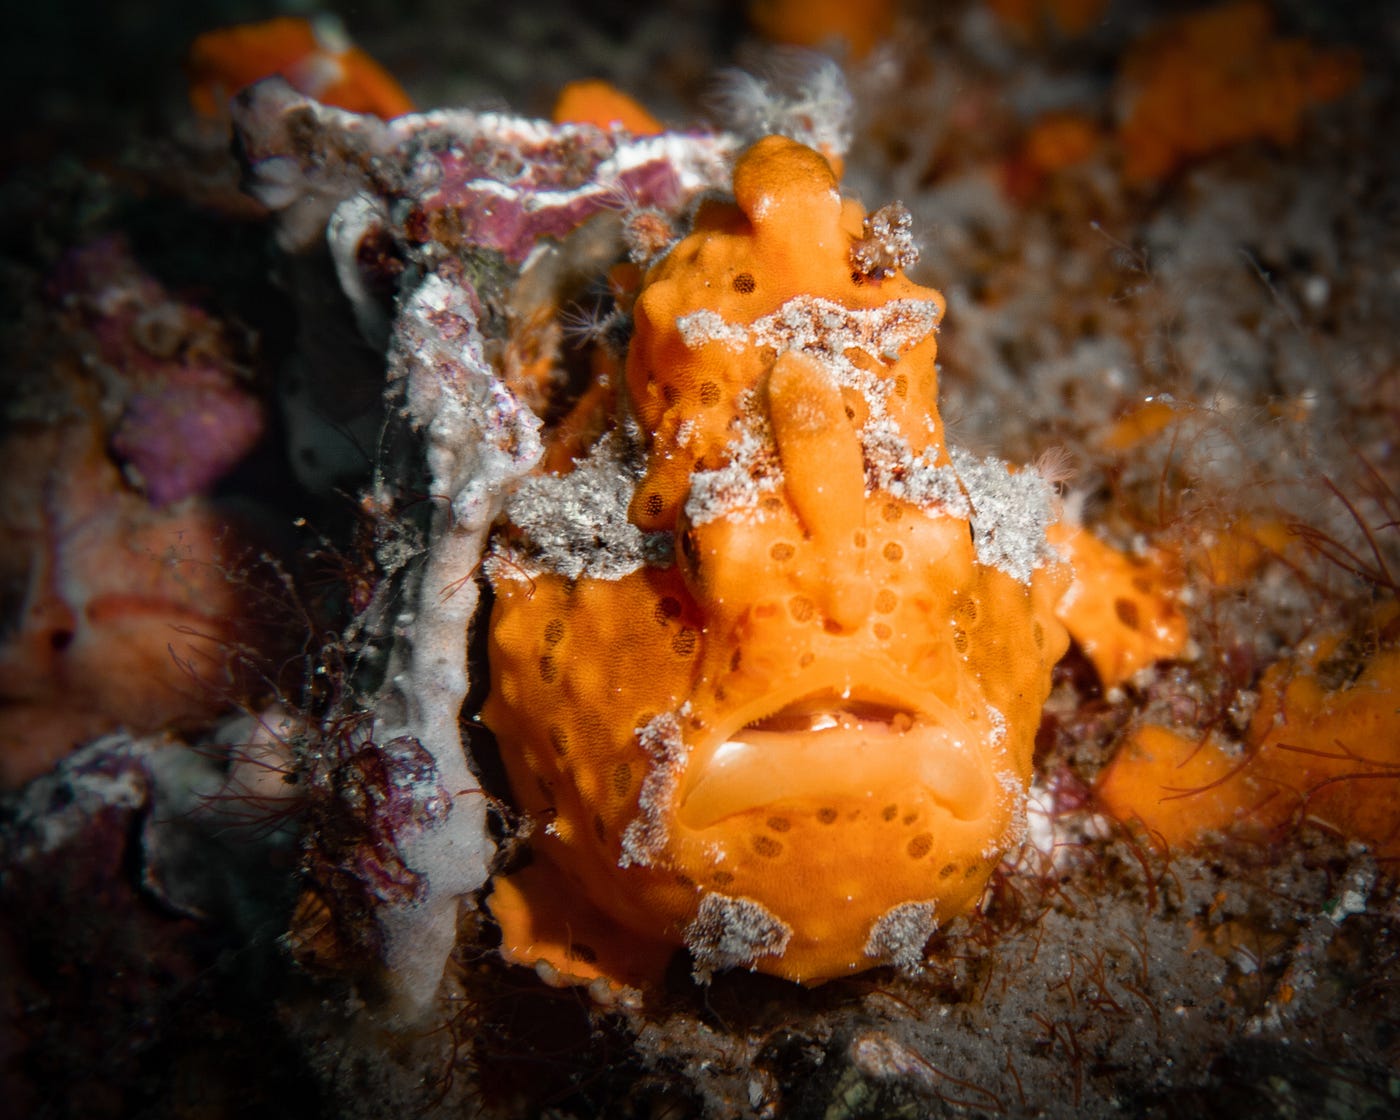 Frogfish: The Aquatic Enigma - More Frog or Fish?